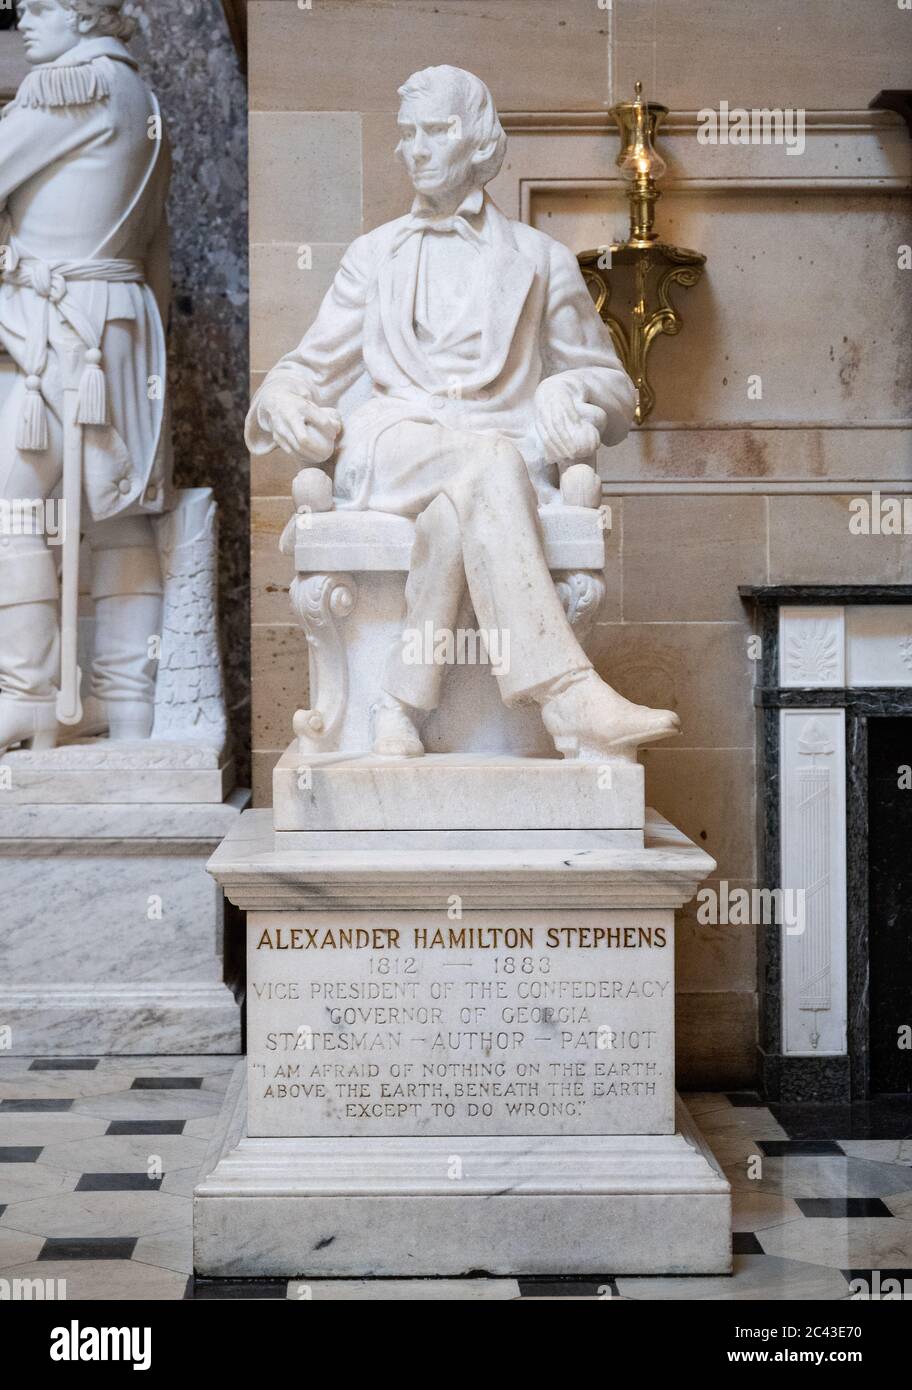 Washington, United States. 23rd June, 2020. A view of a Statue placed by the state of Georgia of Alexander Hamilton Stephens, vice president of the Confederate States at the U.S. Capitol. Credit: SOPA Images Limited/Alamy Live News Stock Photo